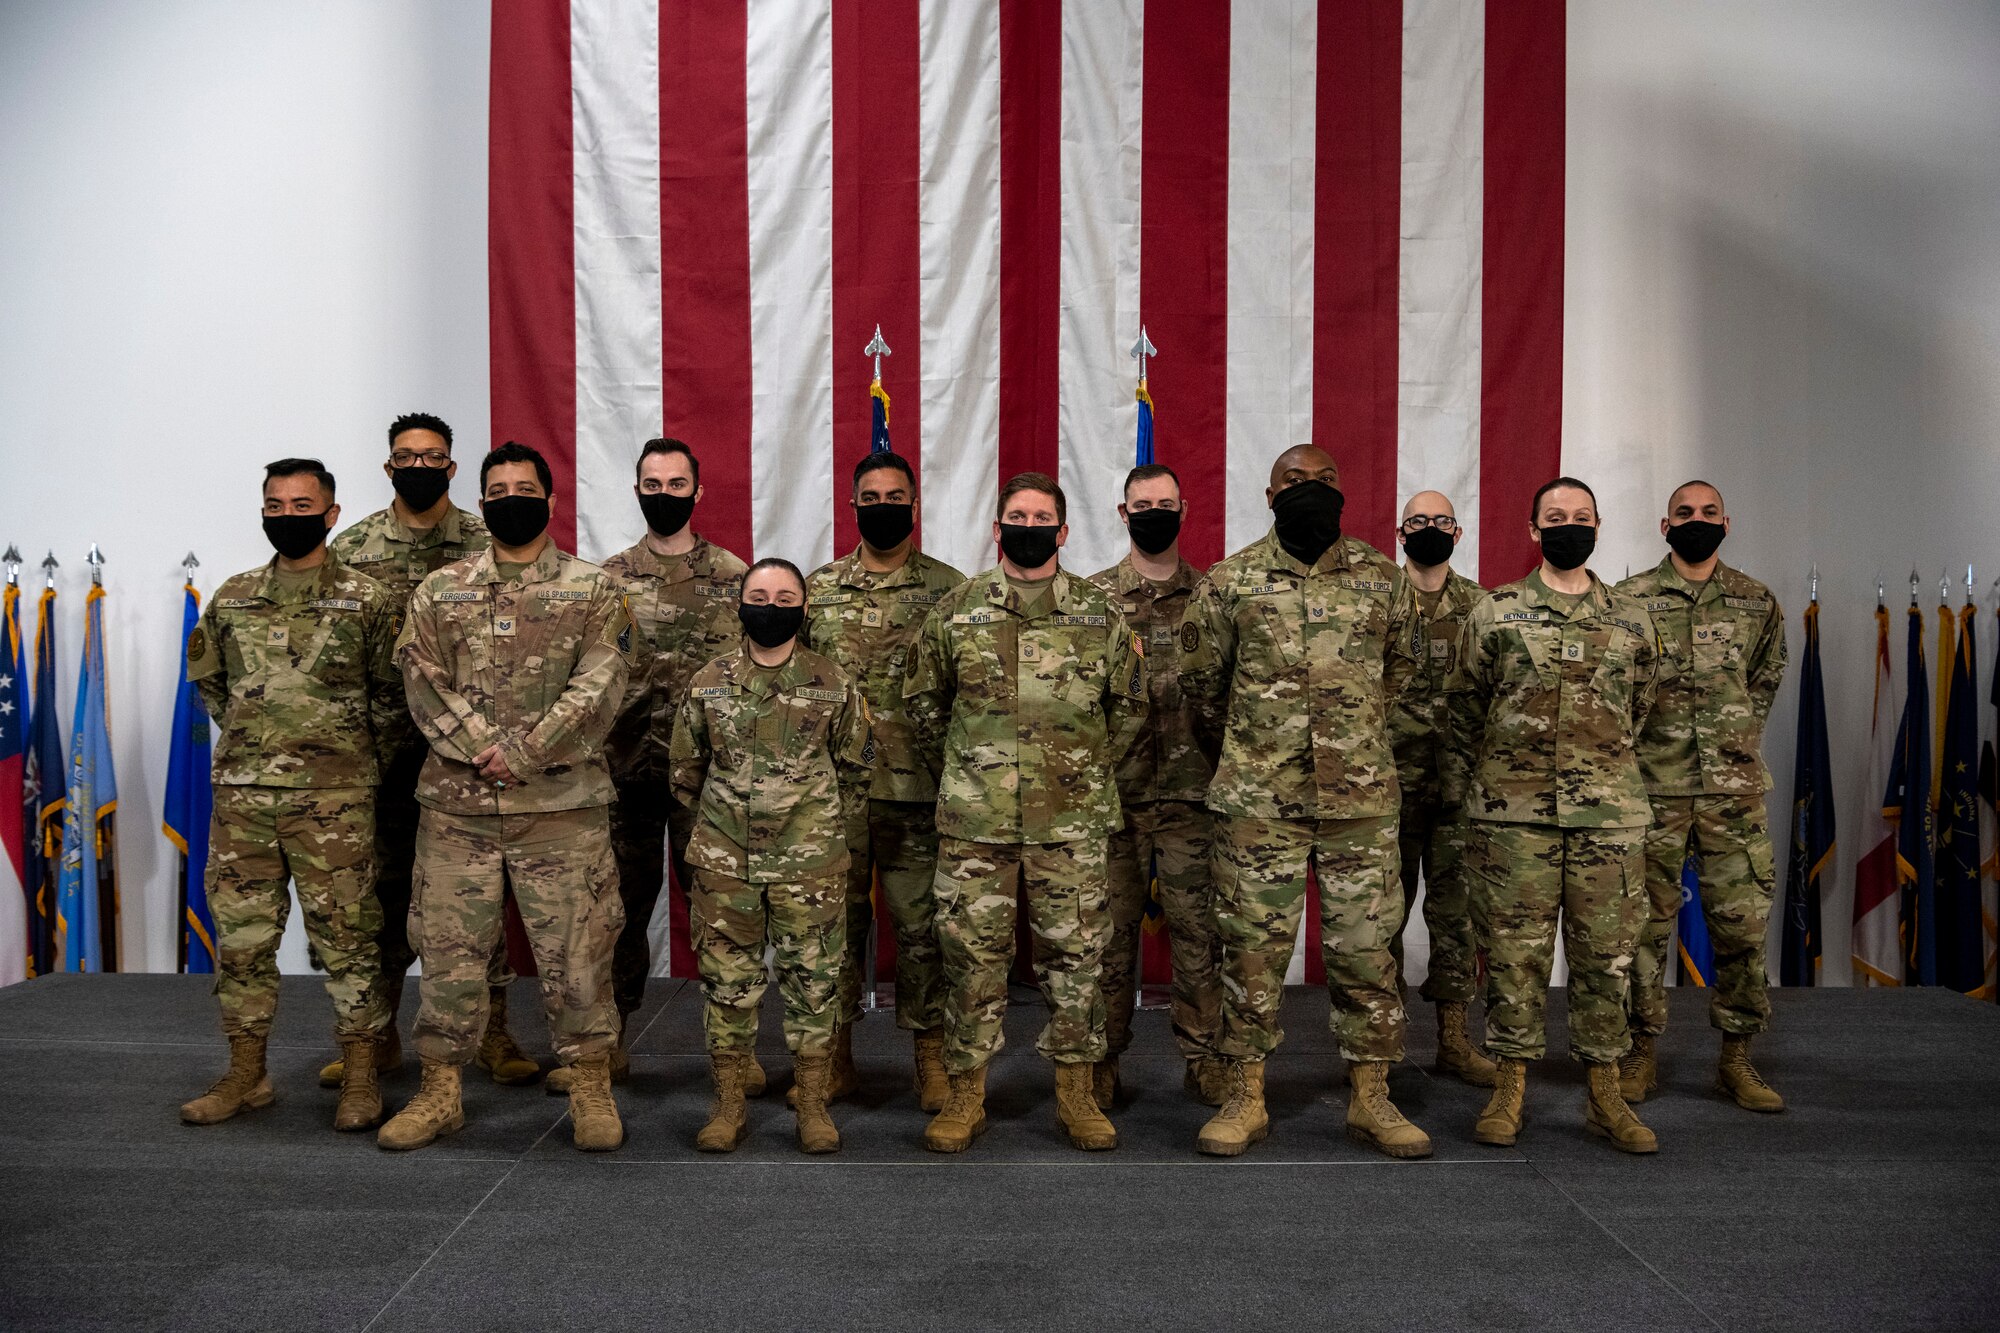 Men and women stand together for a group photo wearing masks.